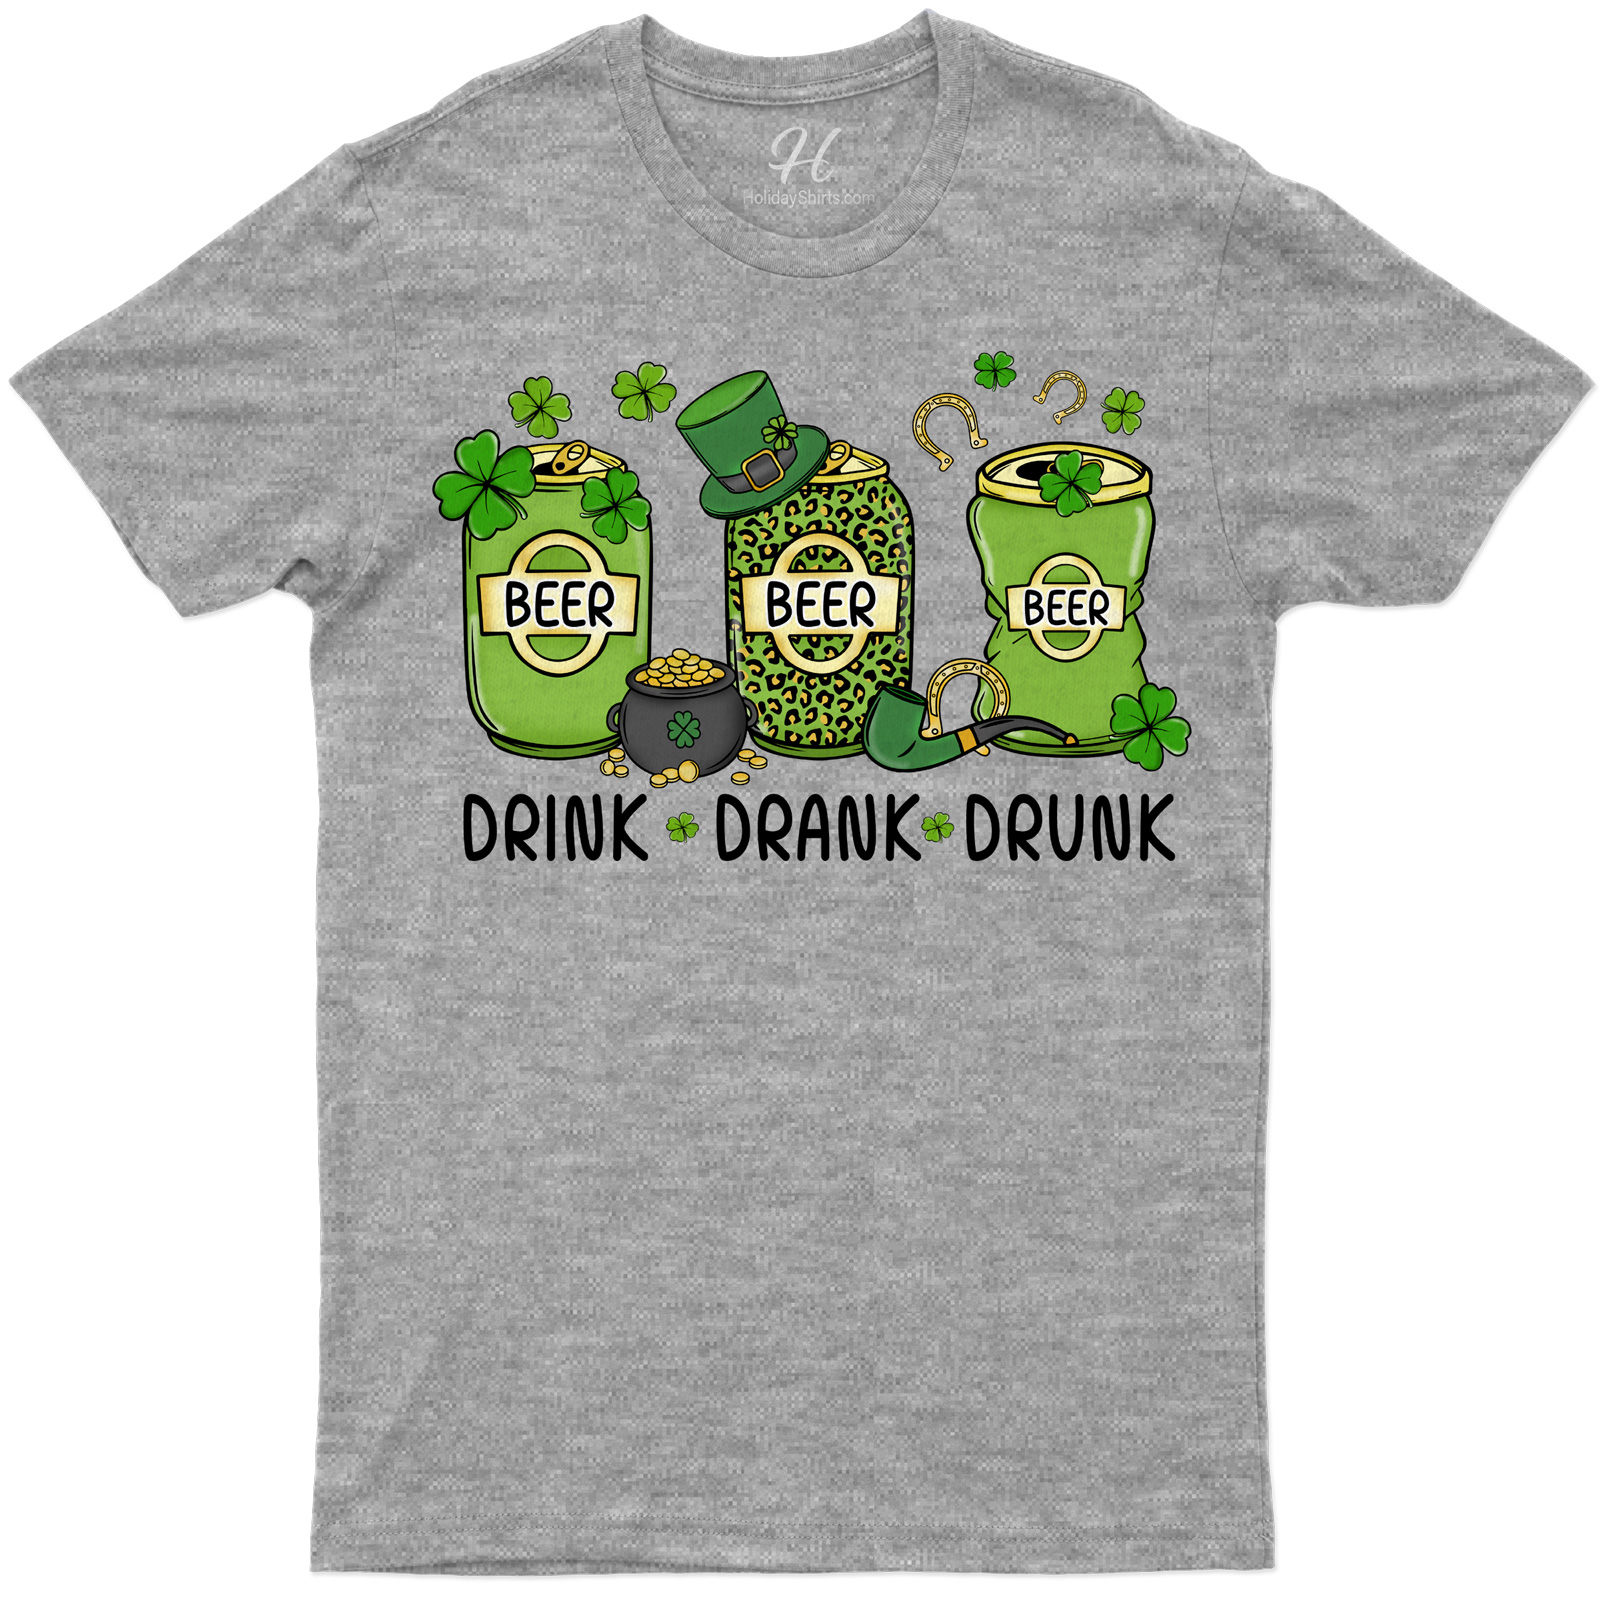 Festive St. Patrick's Day 'drink Drank Drunk' Graphic Tee With Clover & Beer Mug Design